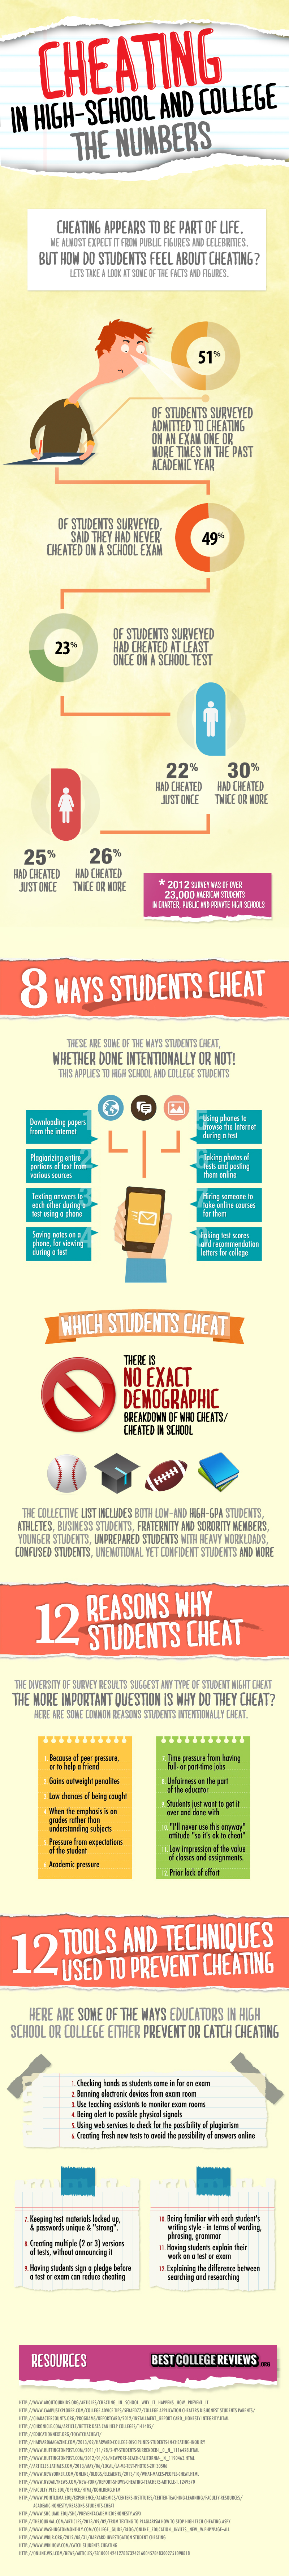 online-cheating-infographic